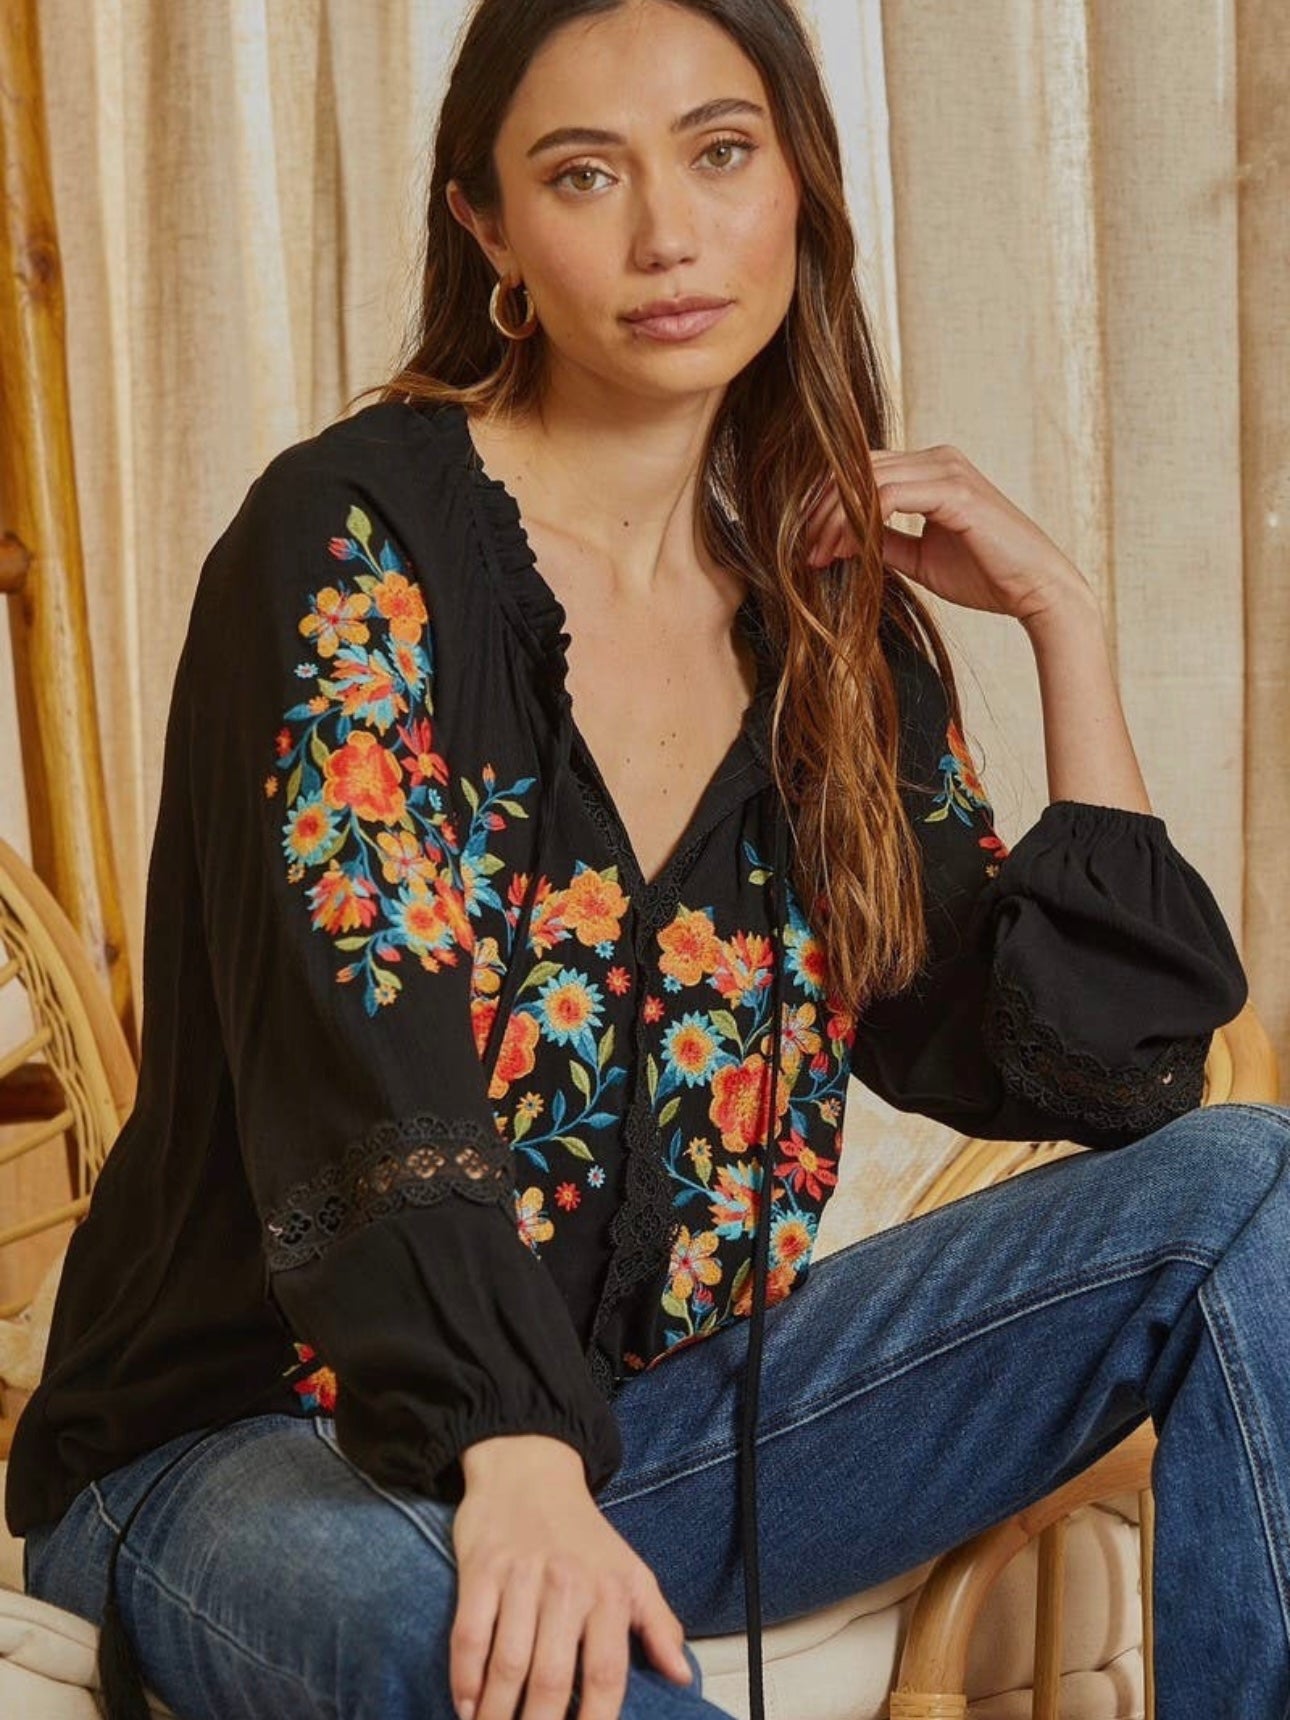 Floral Embroidery Top